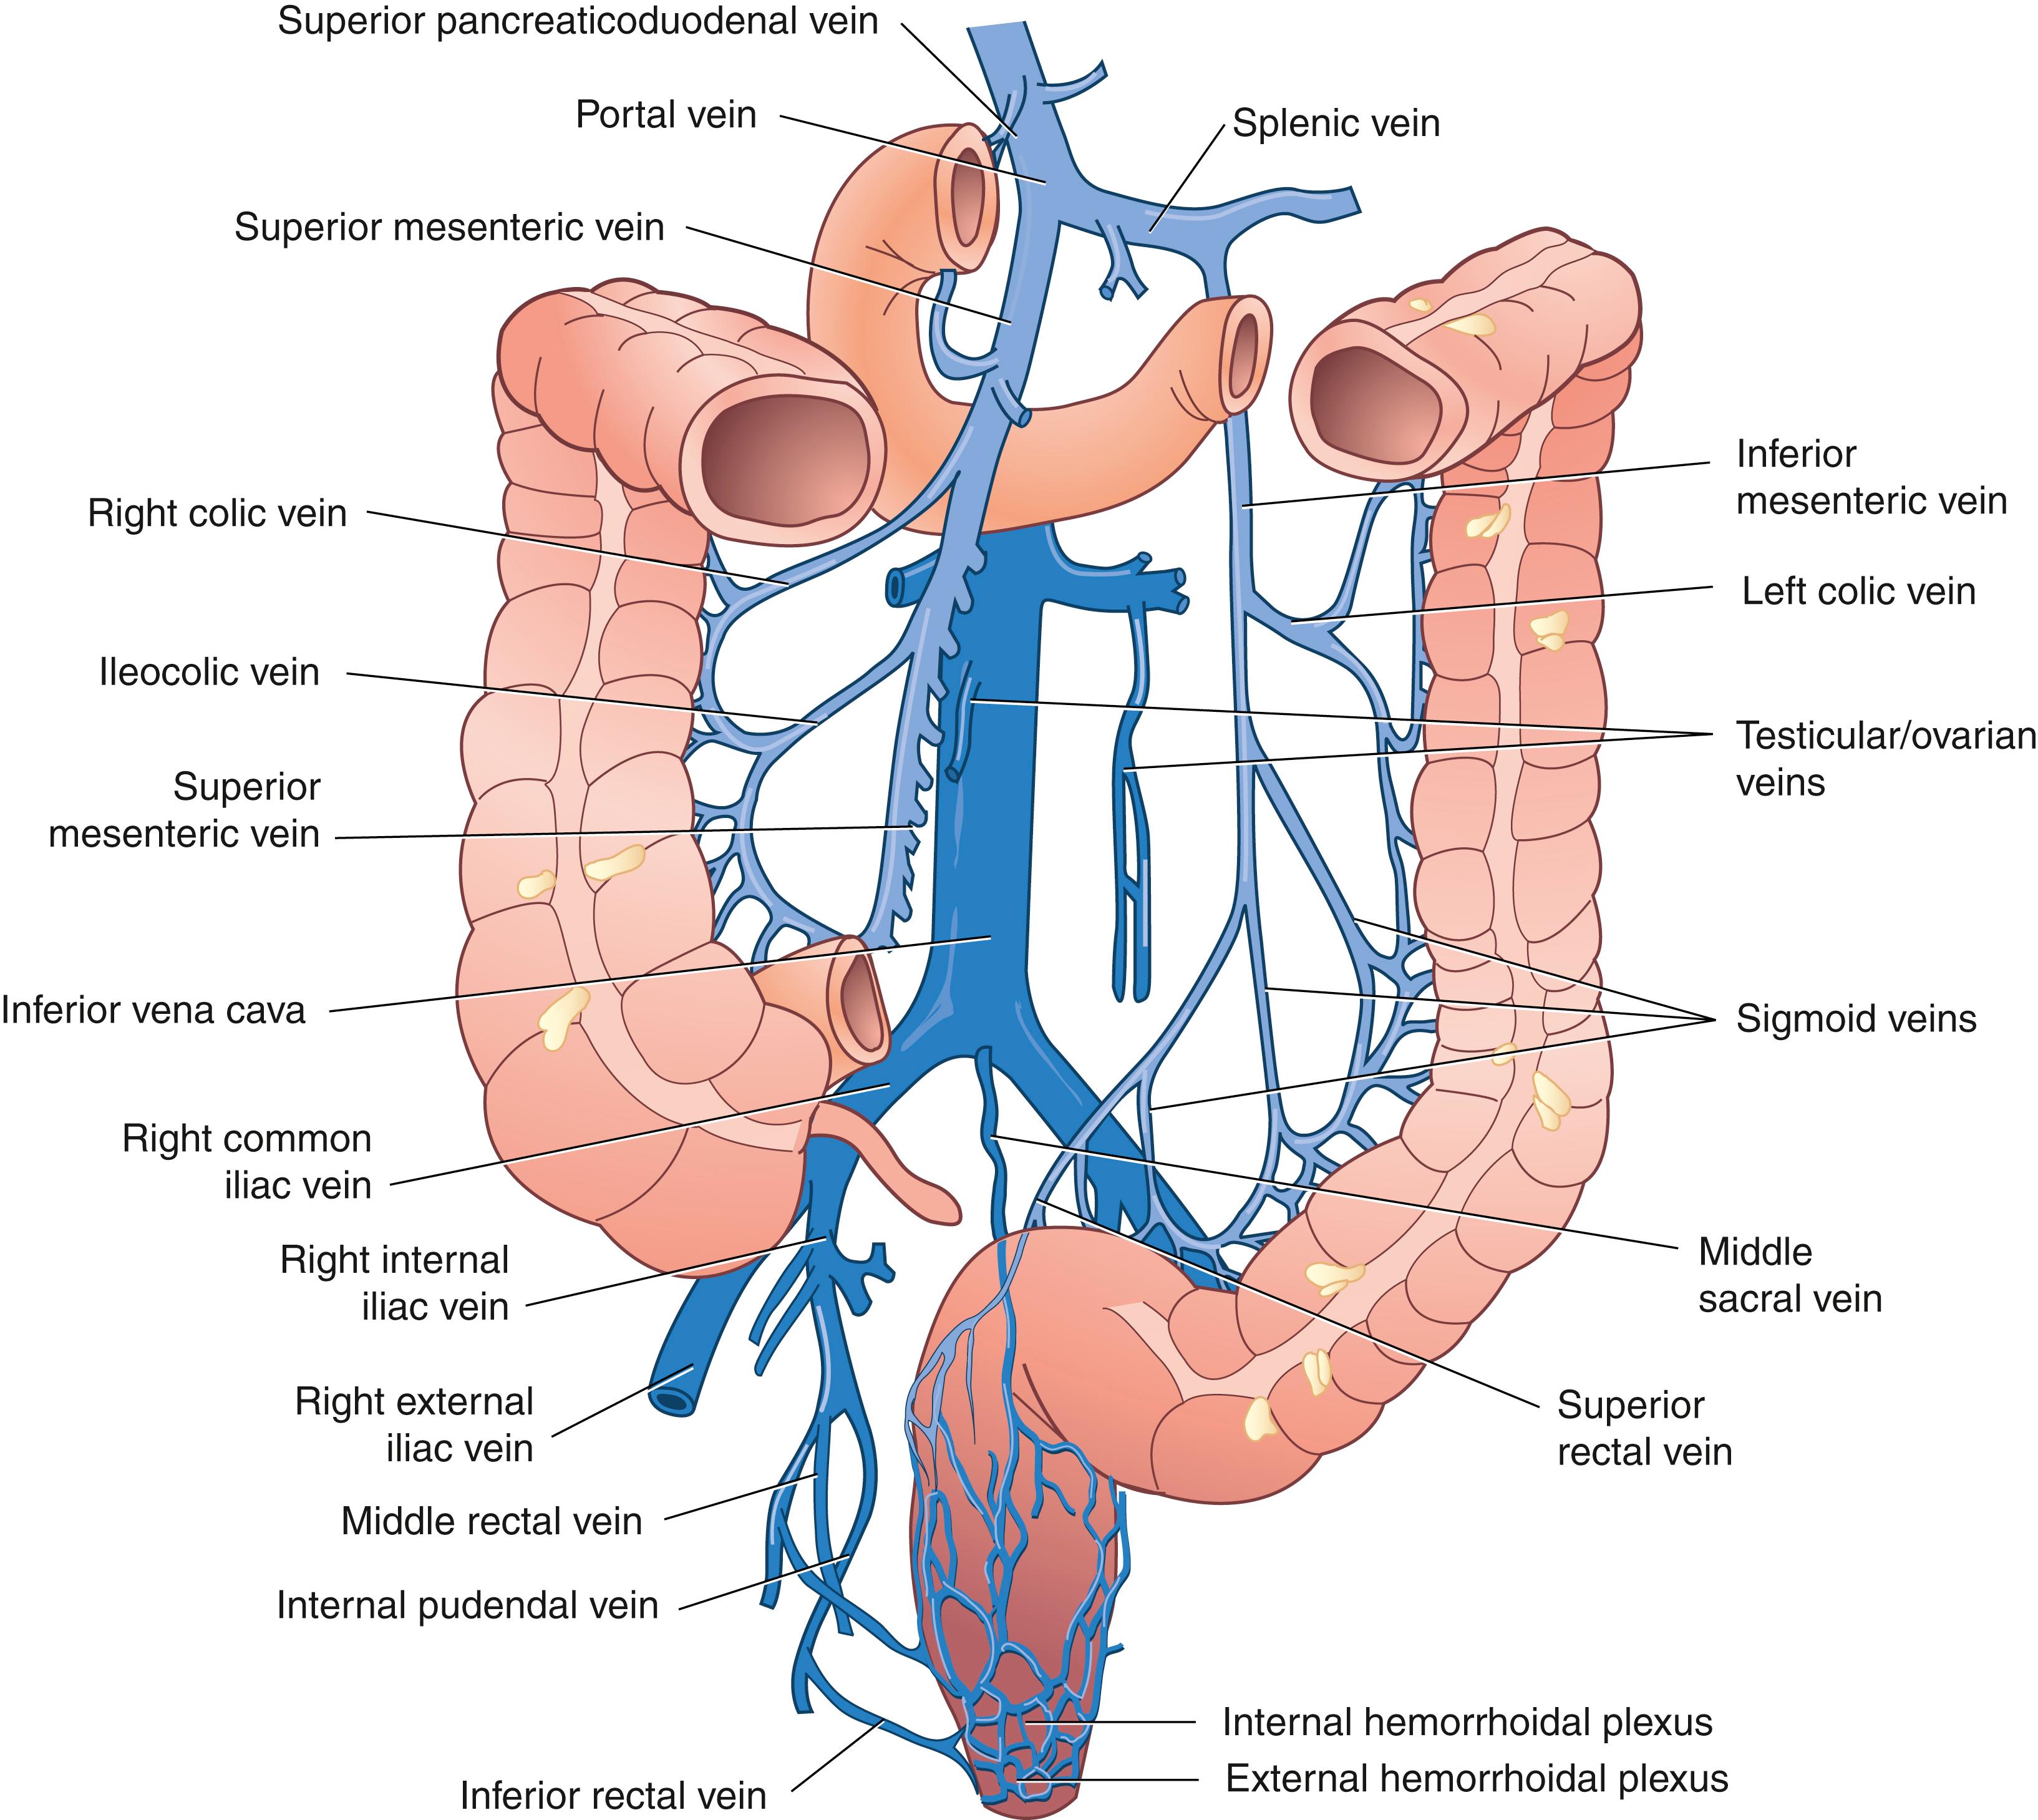 Fig. 52.9, Venous anatomy of the colon and rectum.